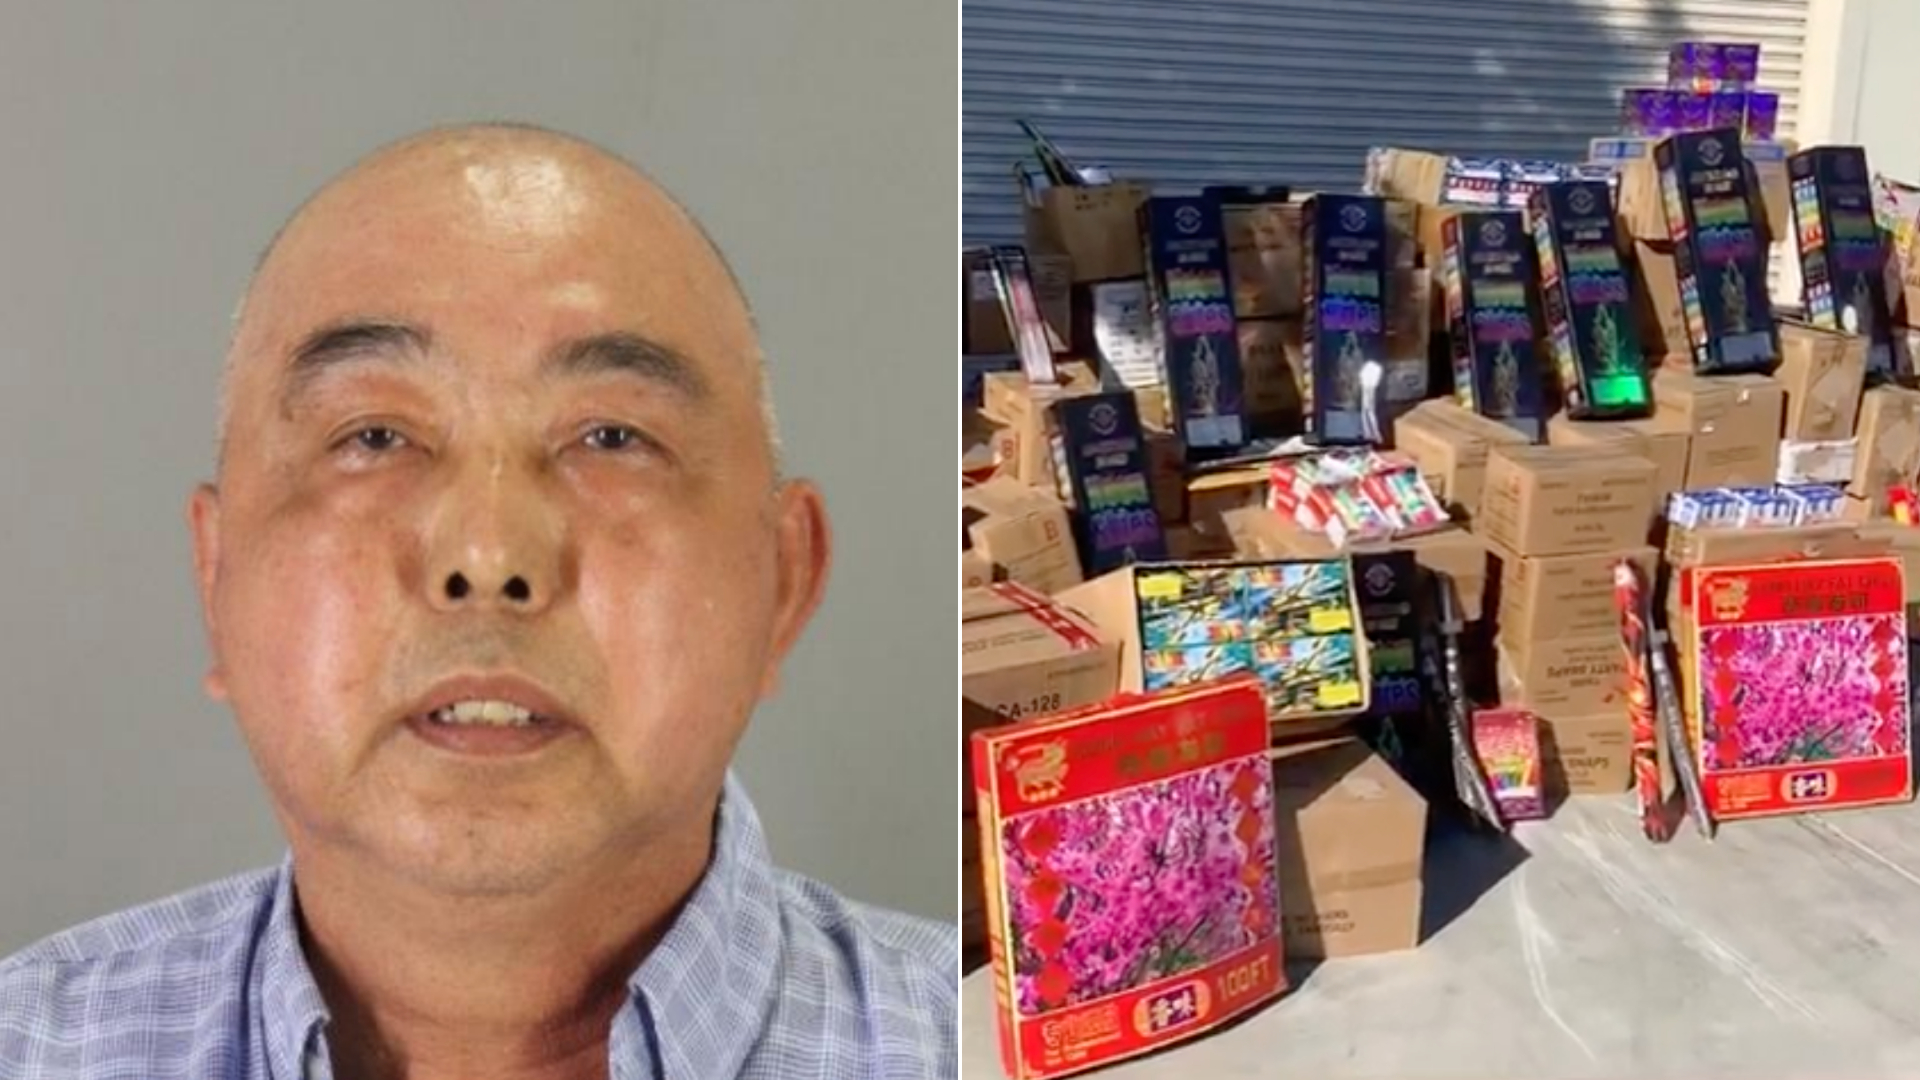 LA County Cracks Down on Illegal Fireworks with Undercover Operations